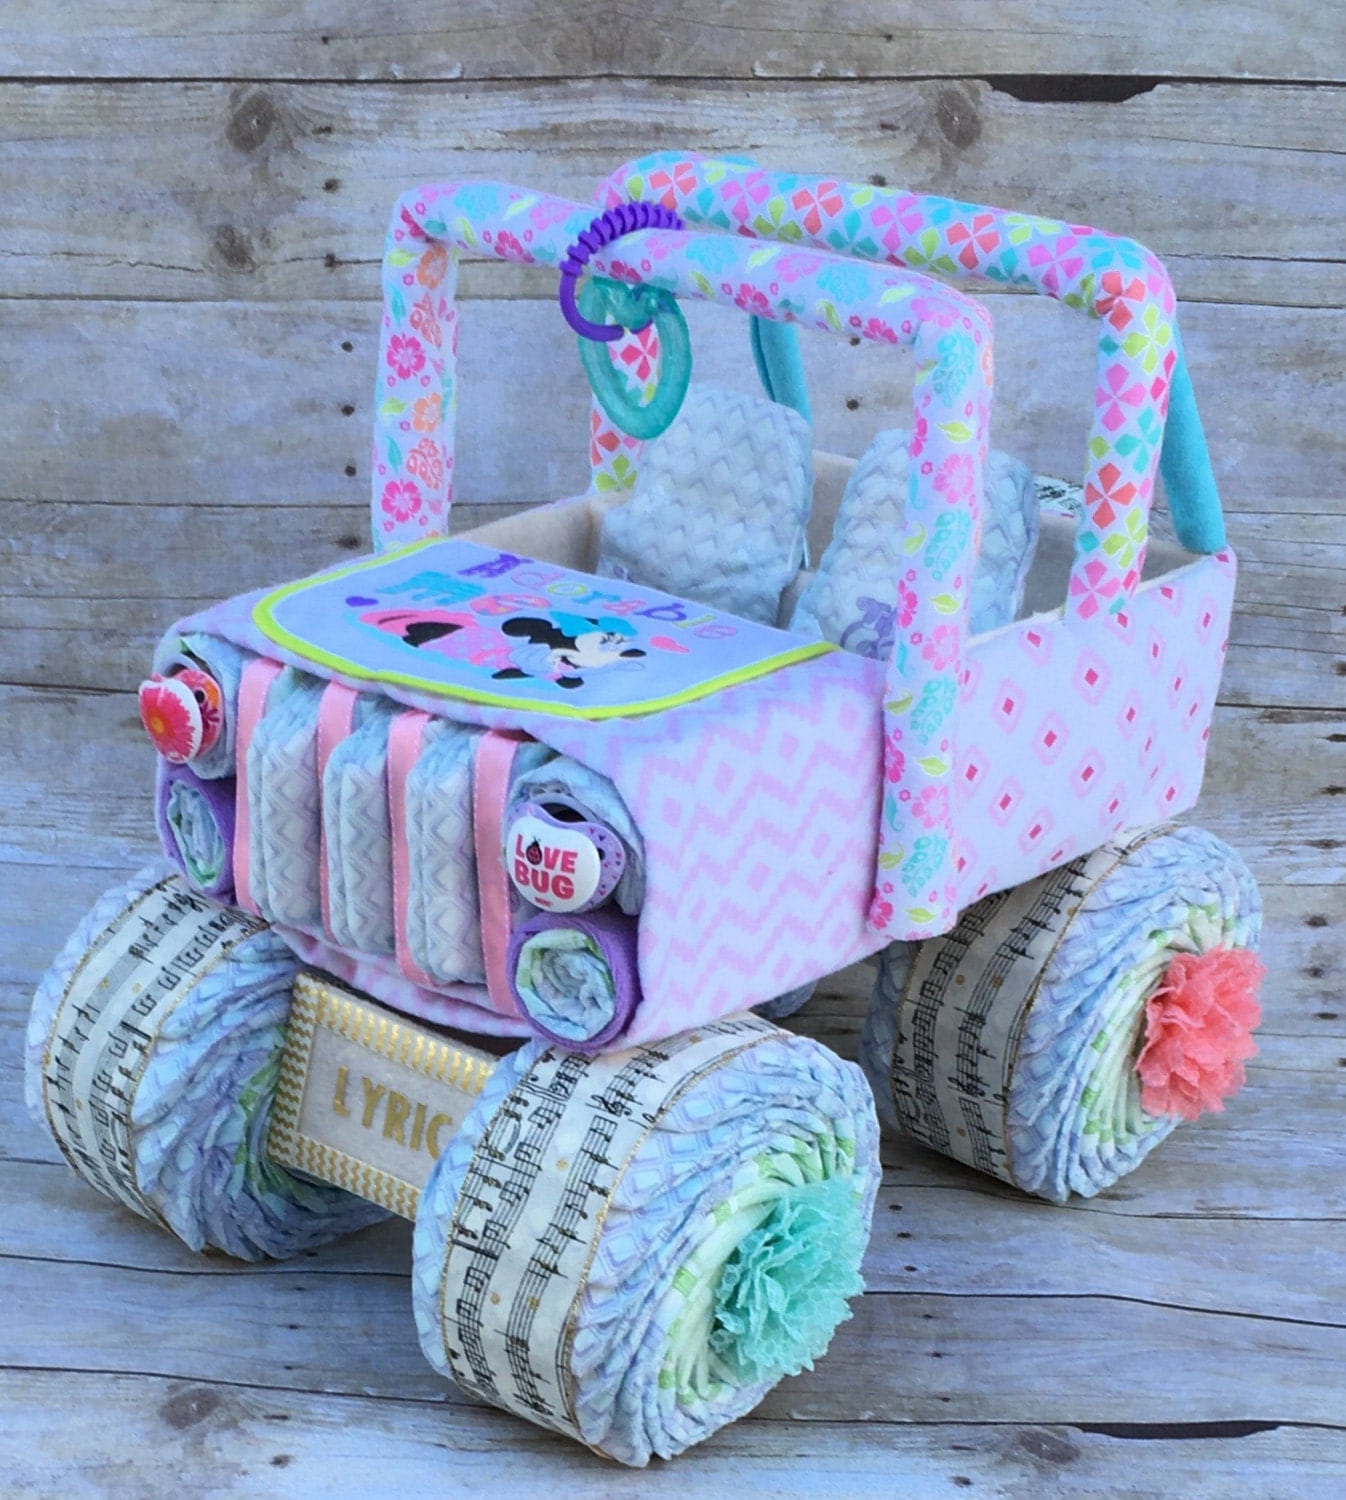 diaper cake cakes jeep shower decorations diapers gift centerpiece centerpieces toy gifts unicorn pink idea cool elephant mom else